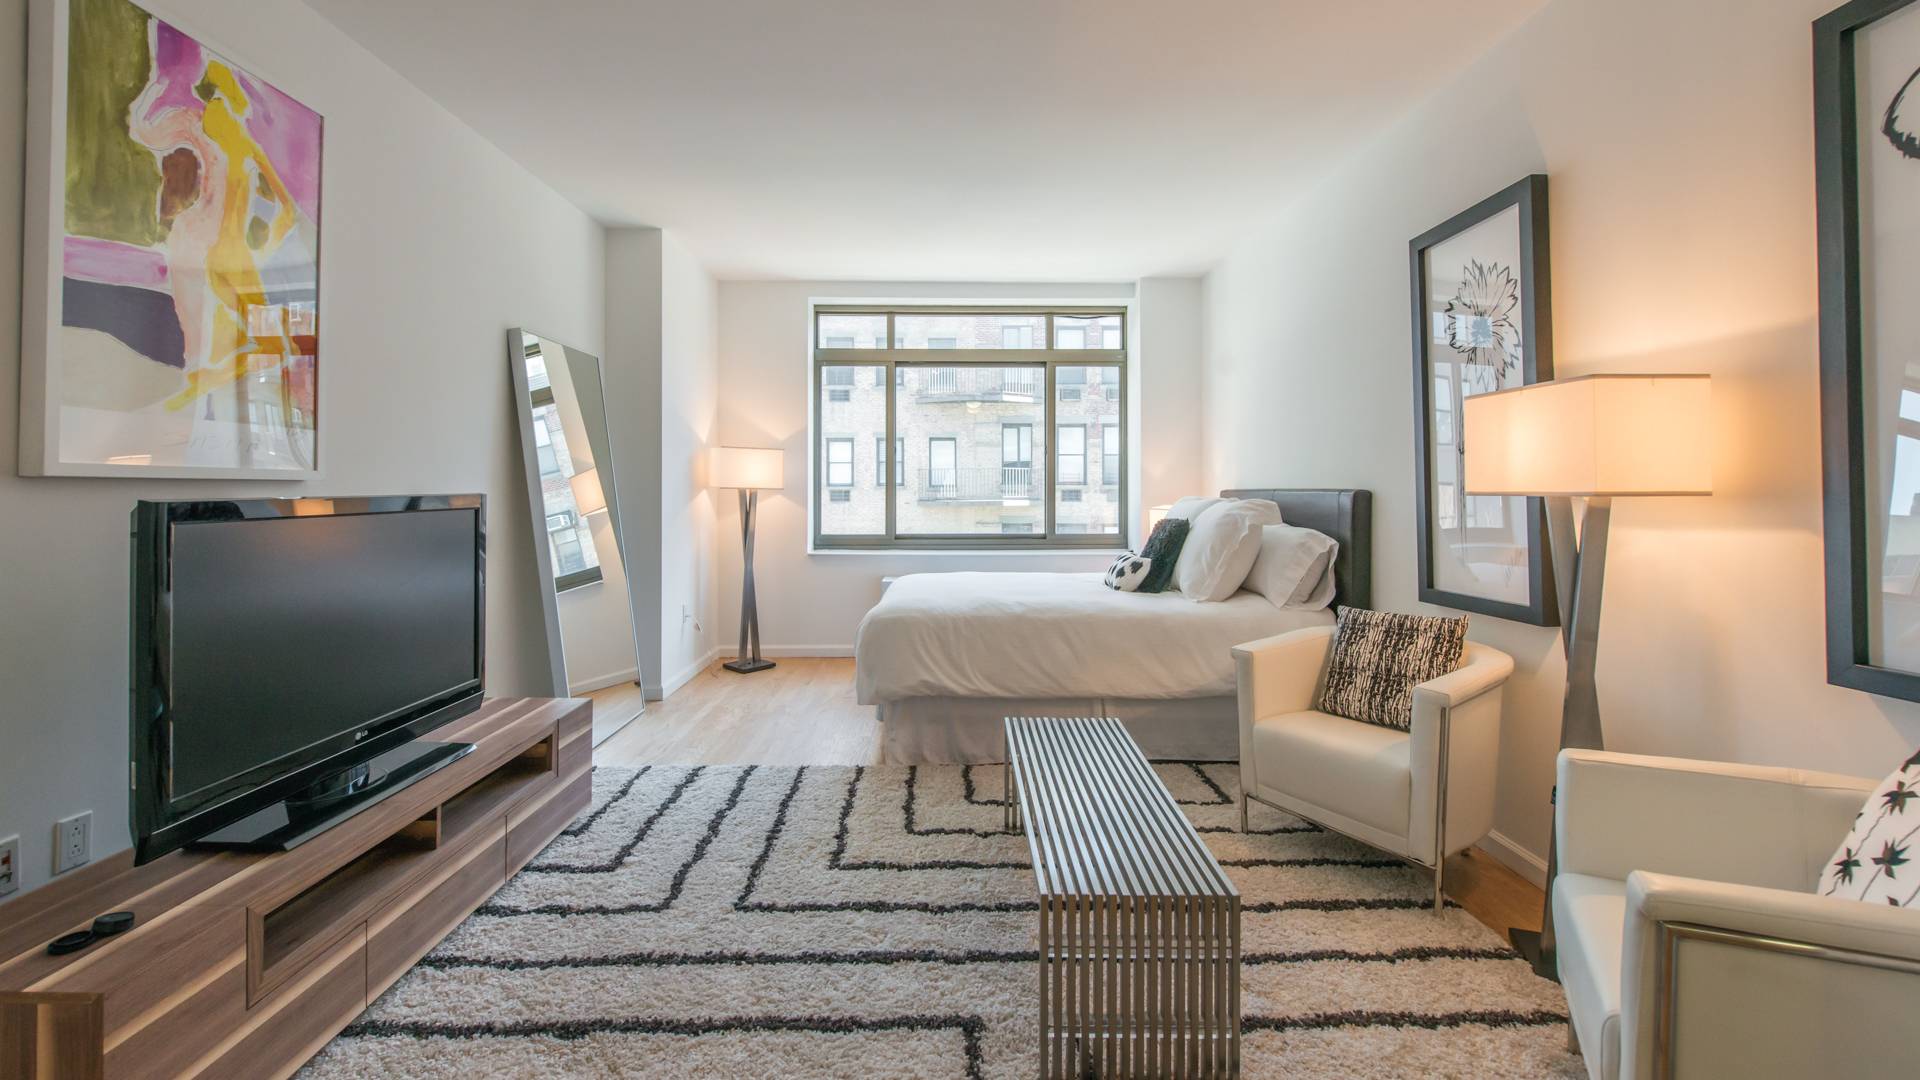 Splendid West Village 2 Bedroom Apartment with 2 Baths featuring a Garage and Fitness Facility